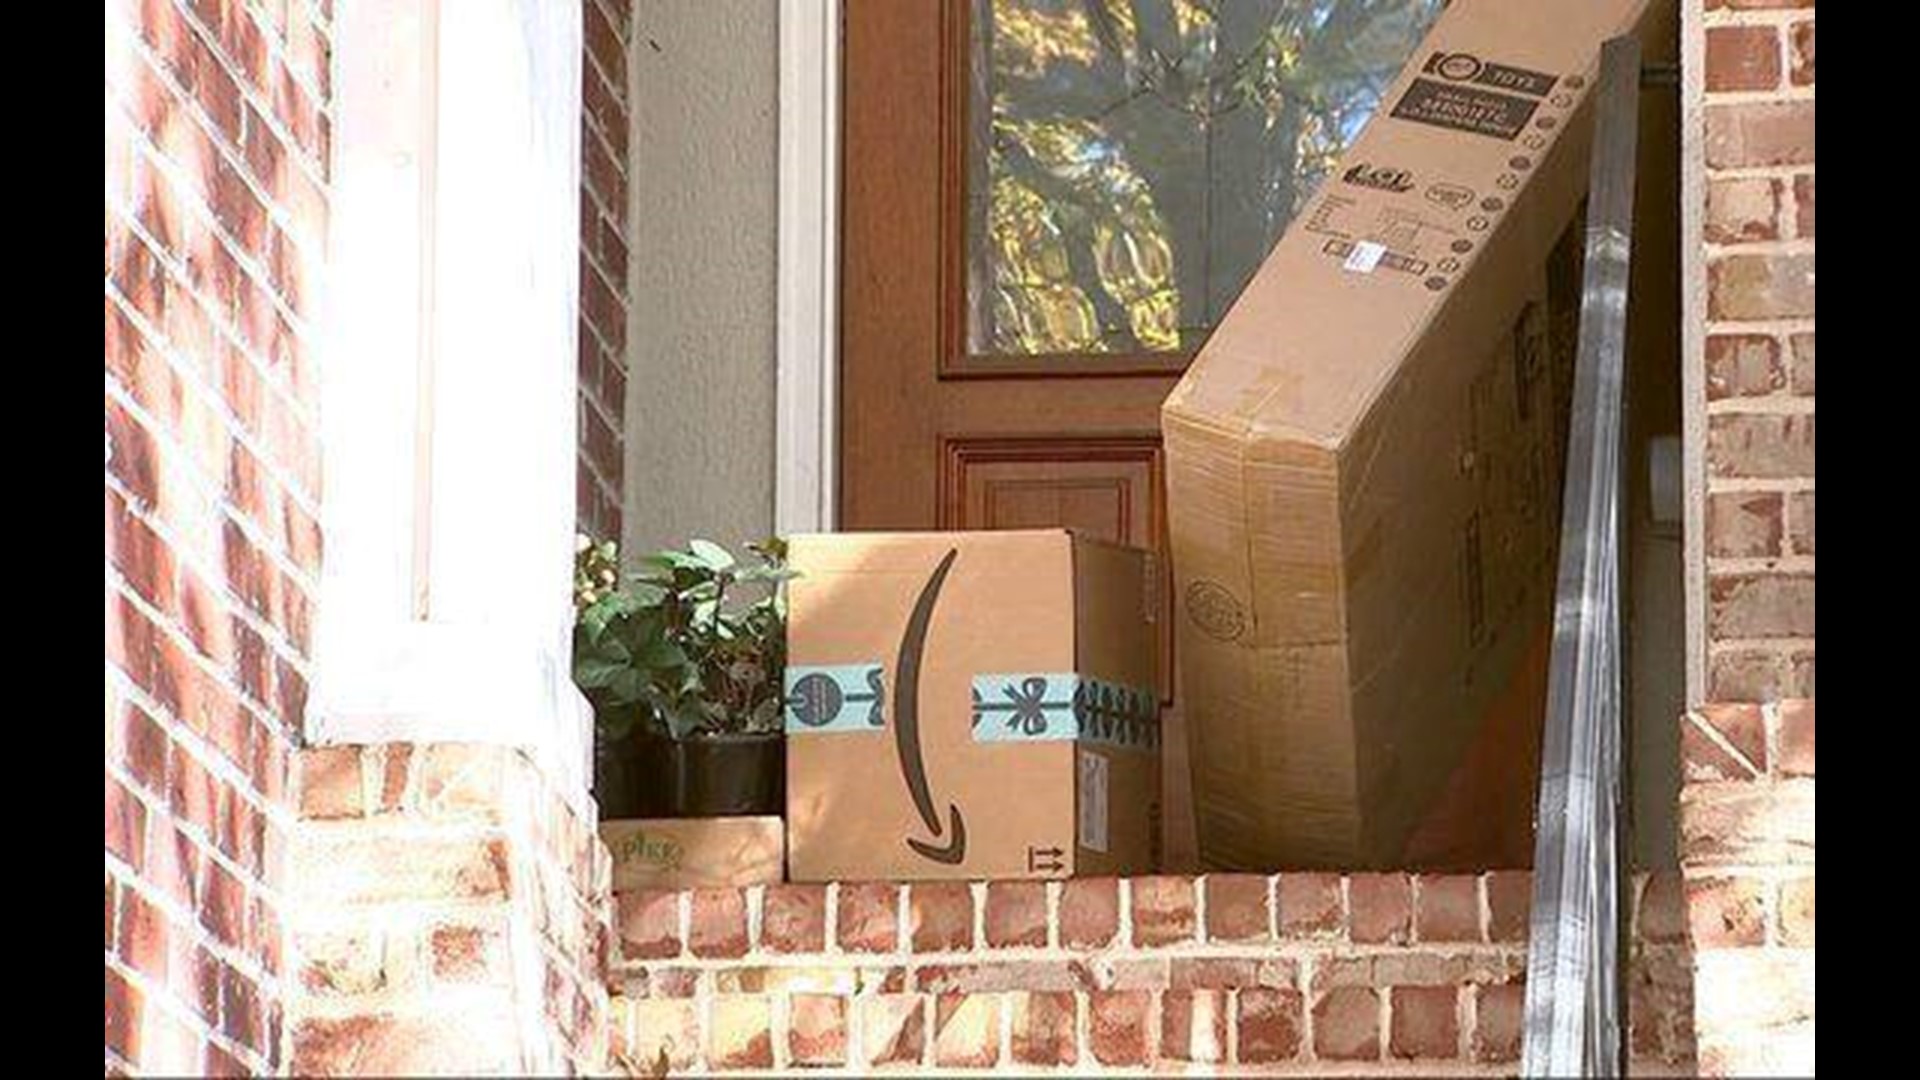 In an effort to target package theft, Spokane Police have a new program on Facebook where people can help identify porch pirates.